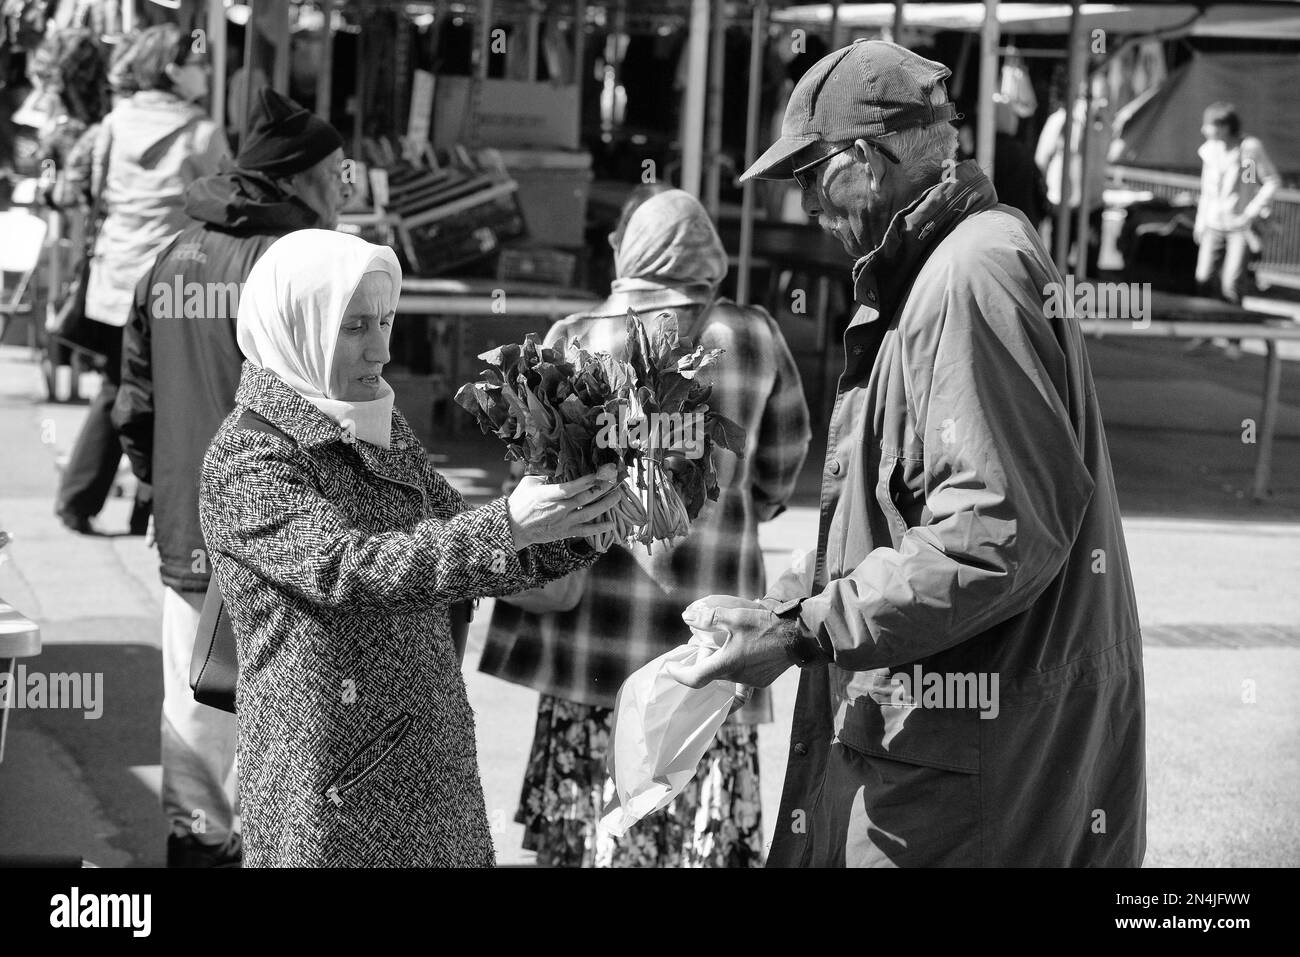 Street photography catching the every day life of every day people going about their busy lives Stock Photo